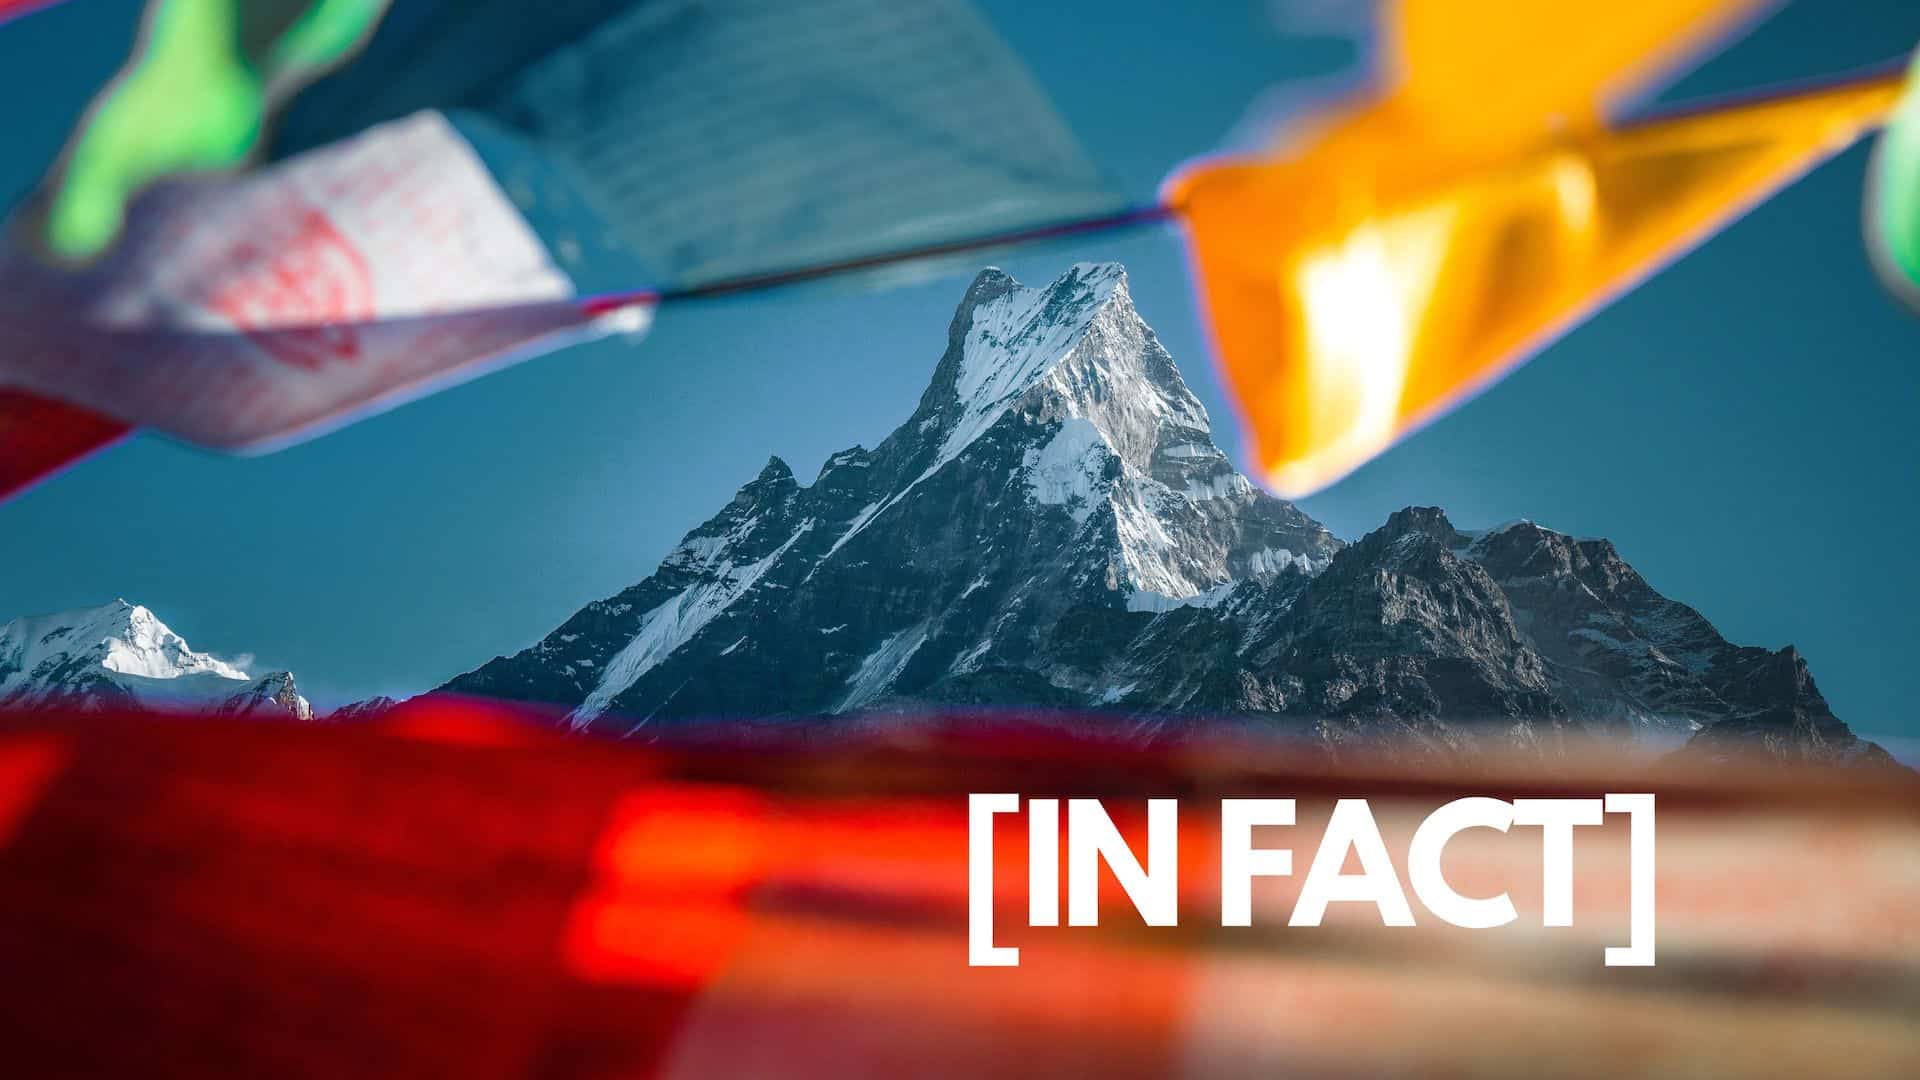 30 Mind-blowing Facts About Mount Everest That Will Amaze You